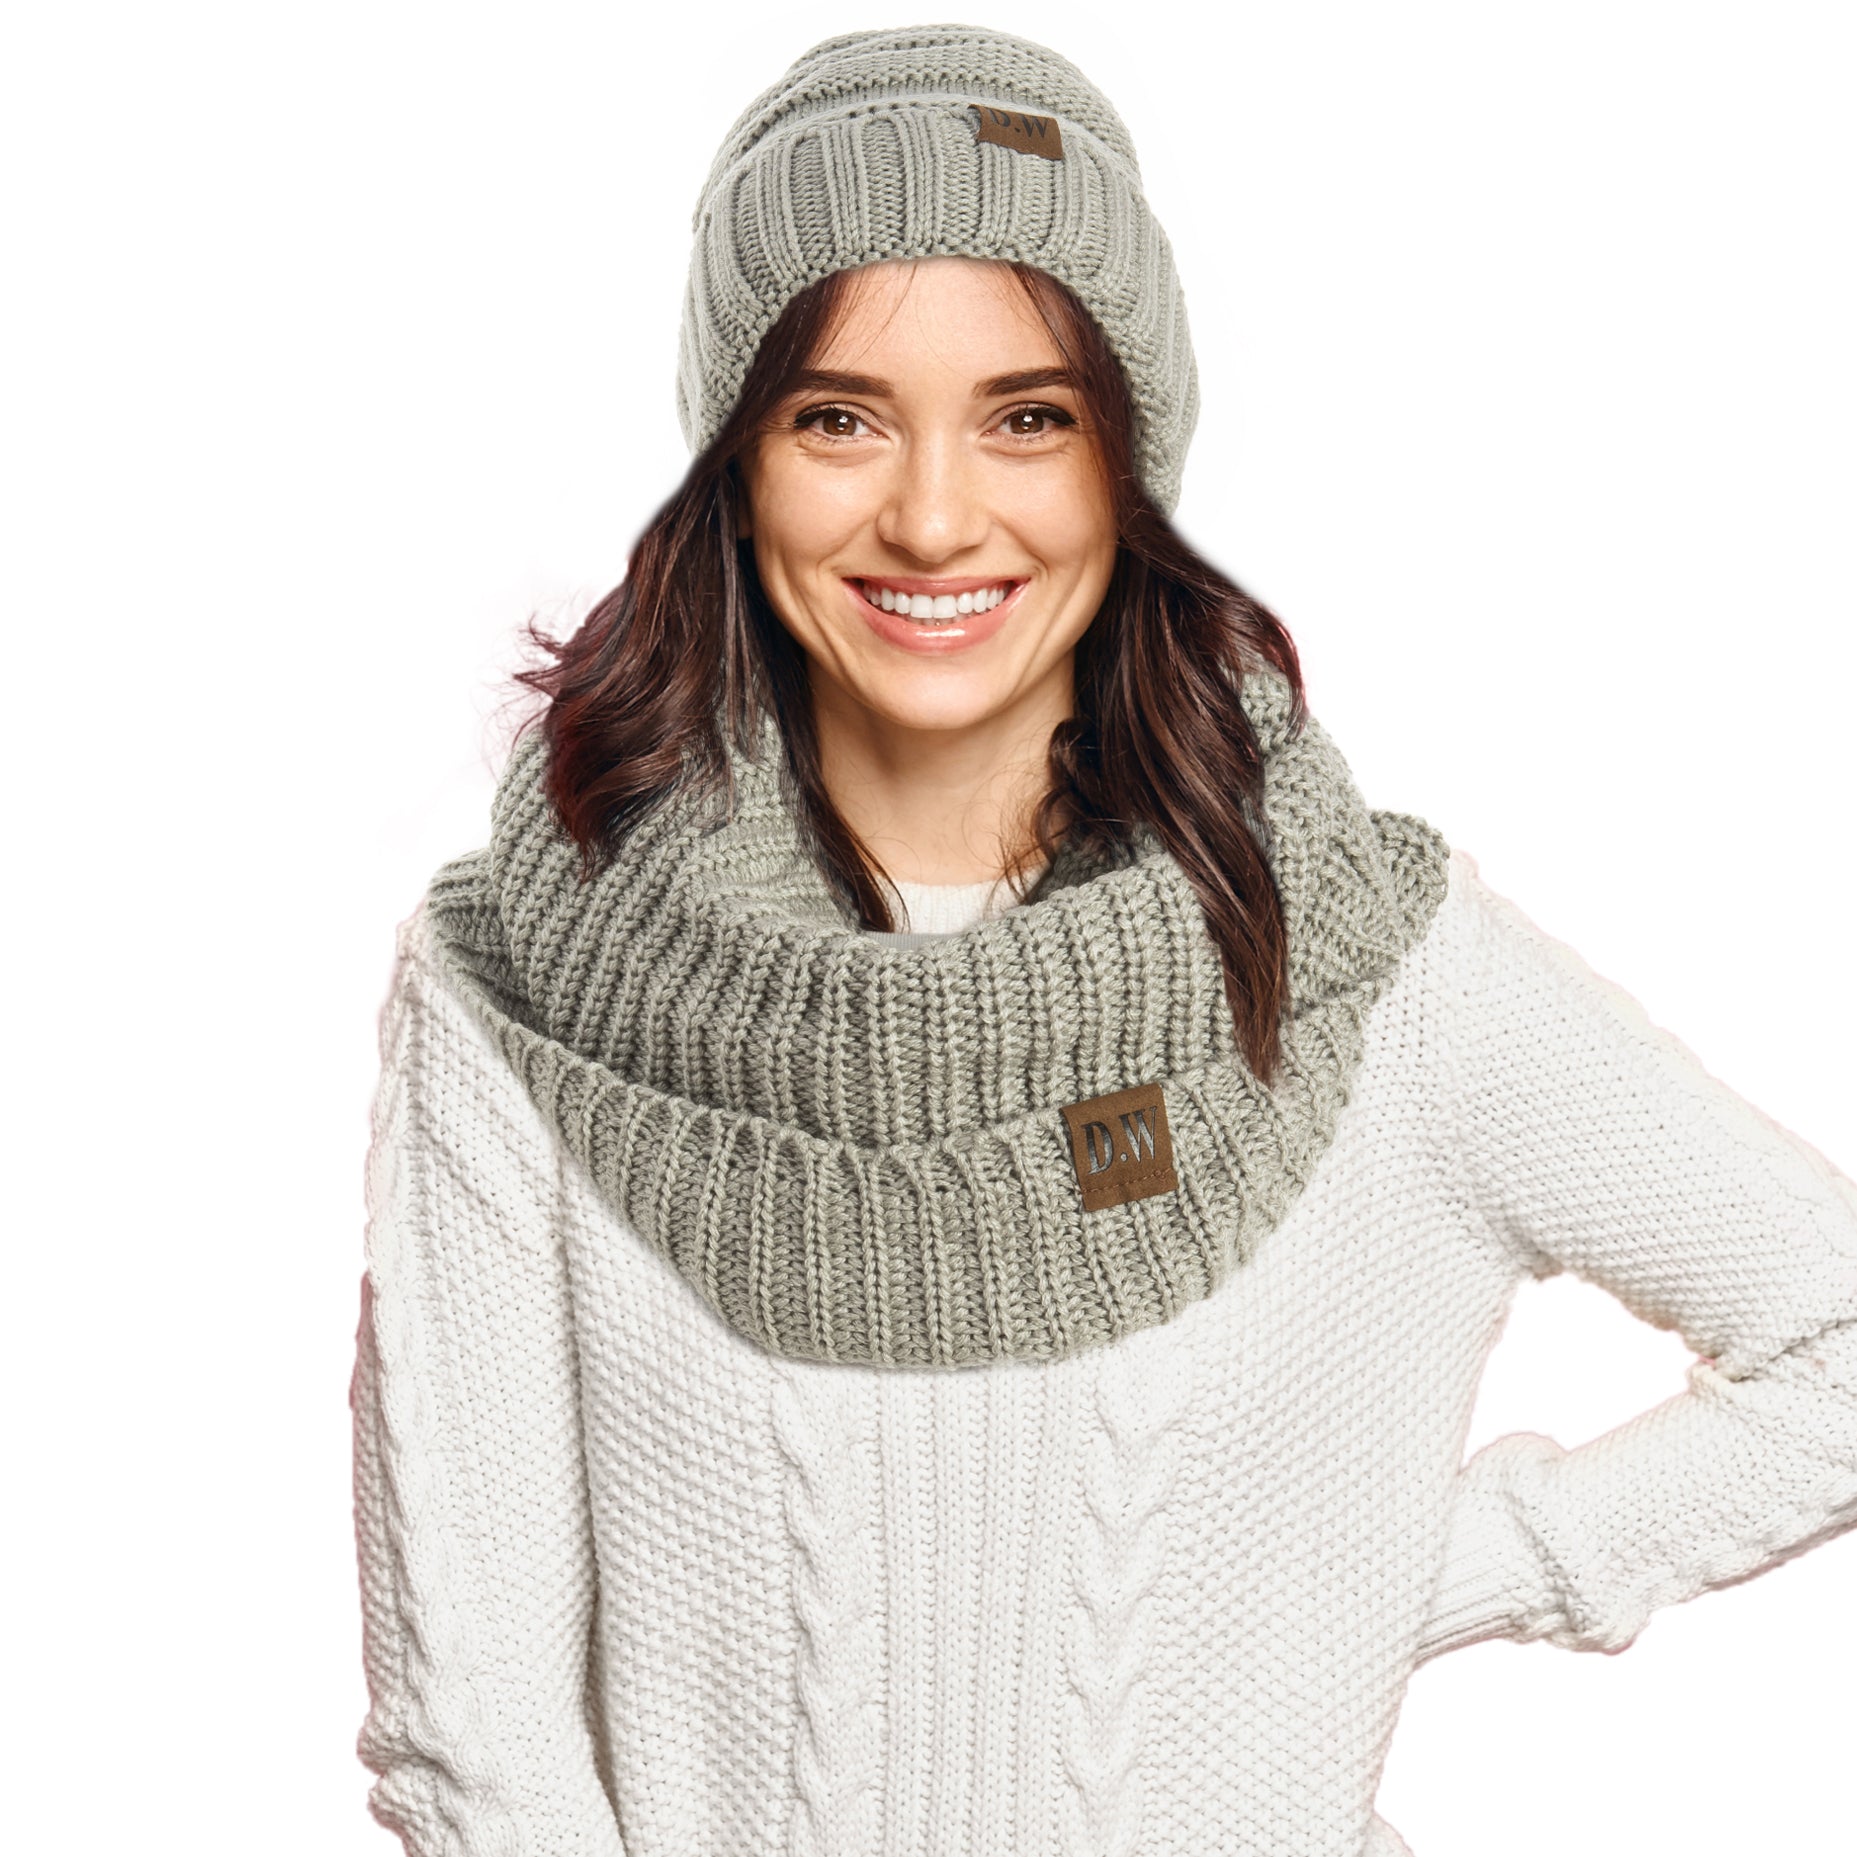 Wool Hat Scarf Set Gray Scarf Knit Loop Scarf for Women Hat 